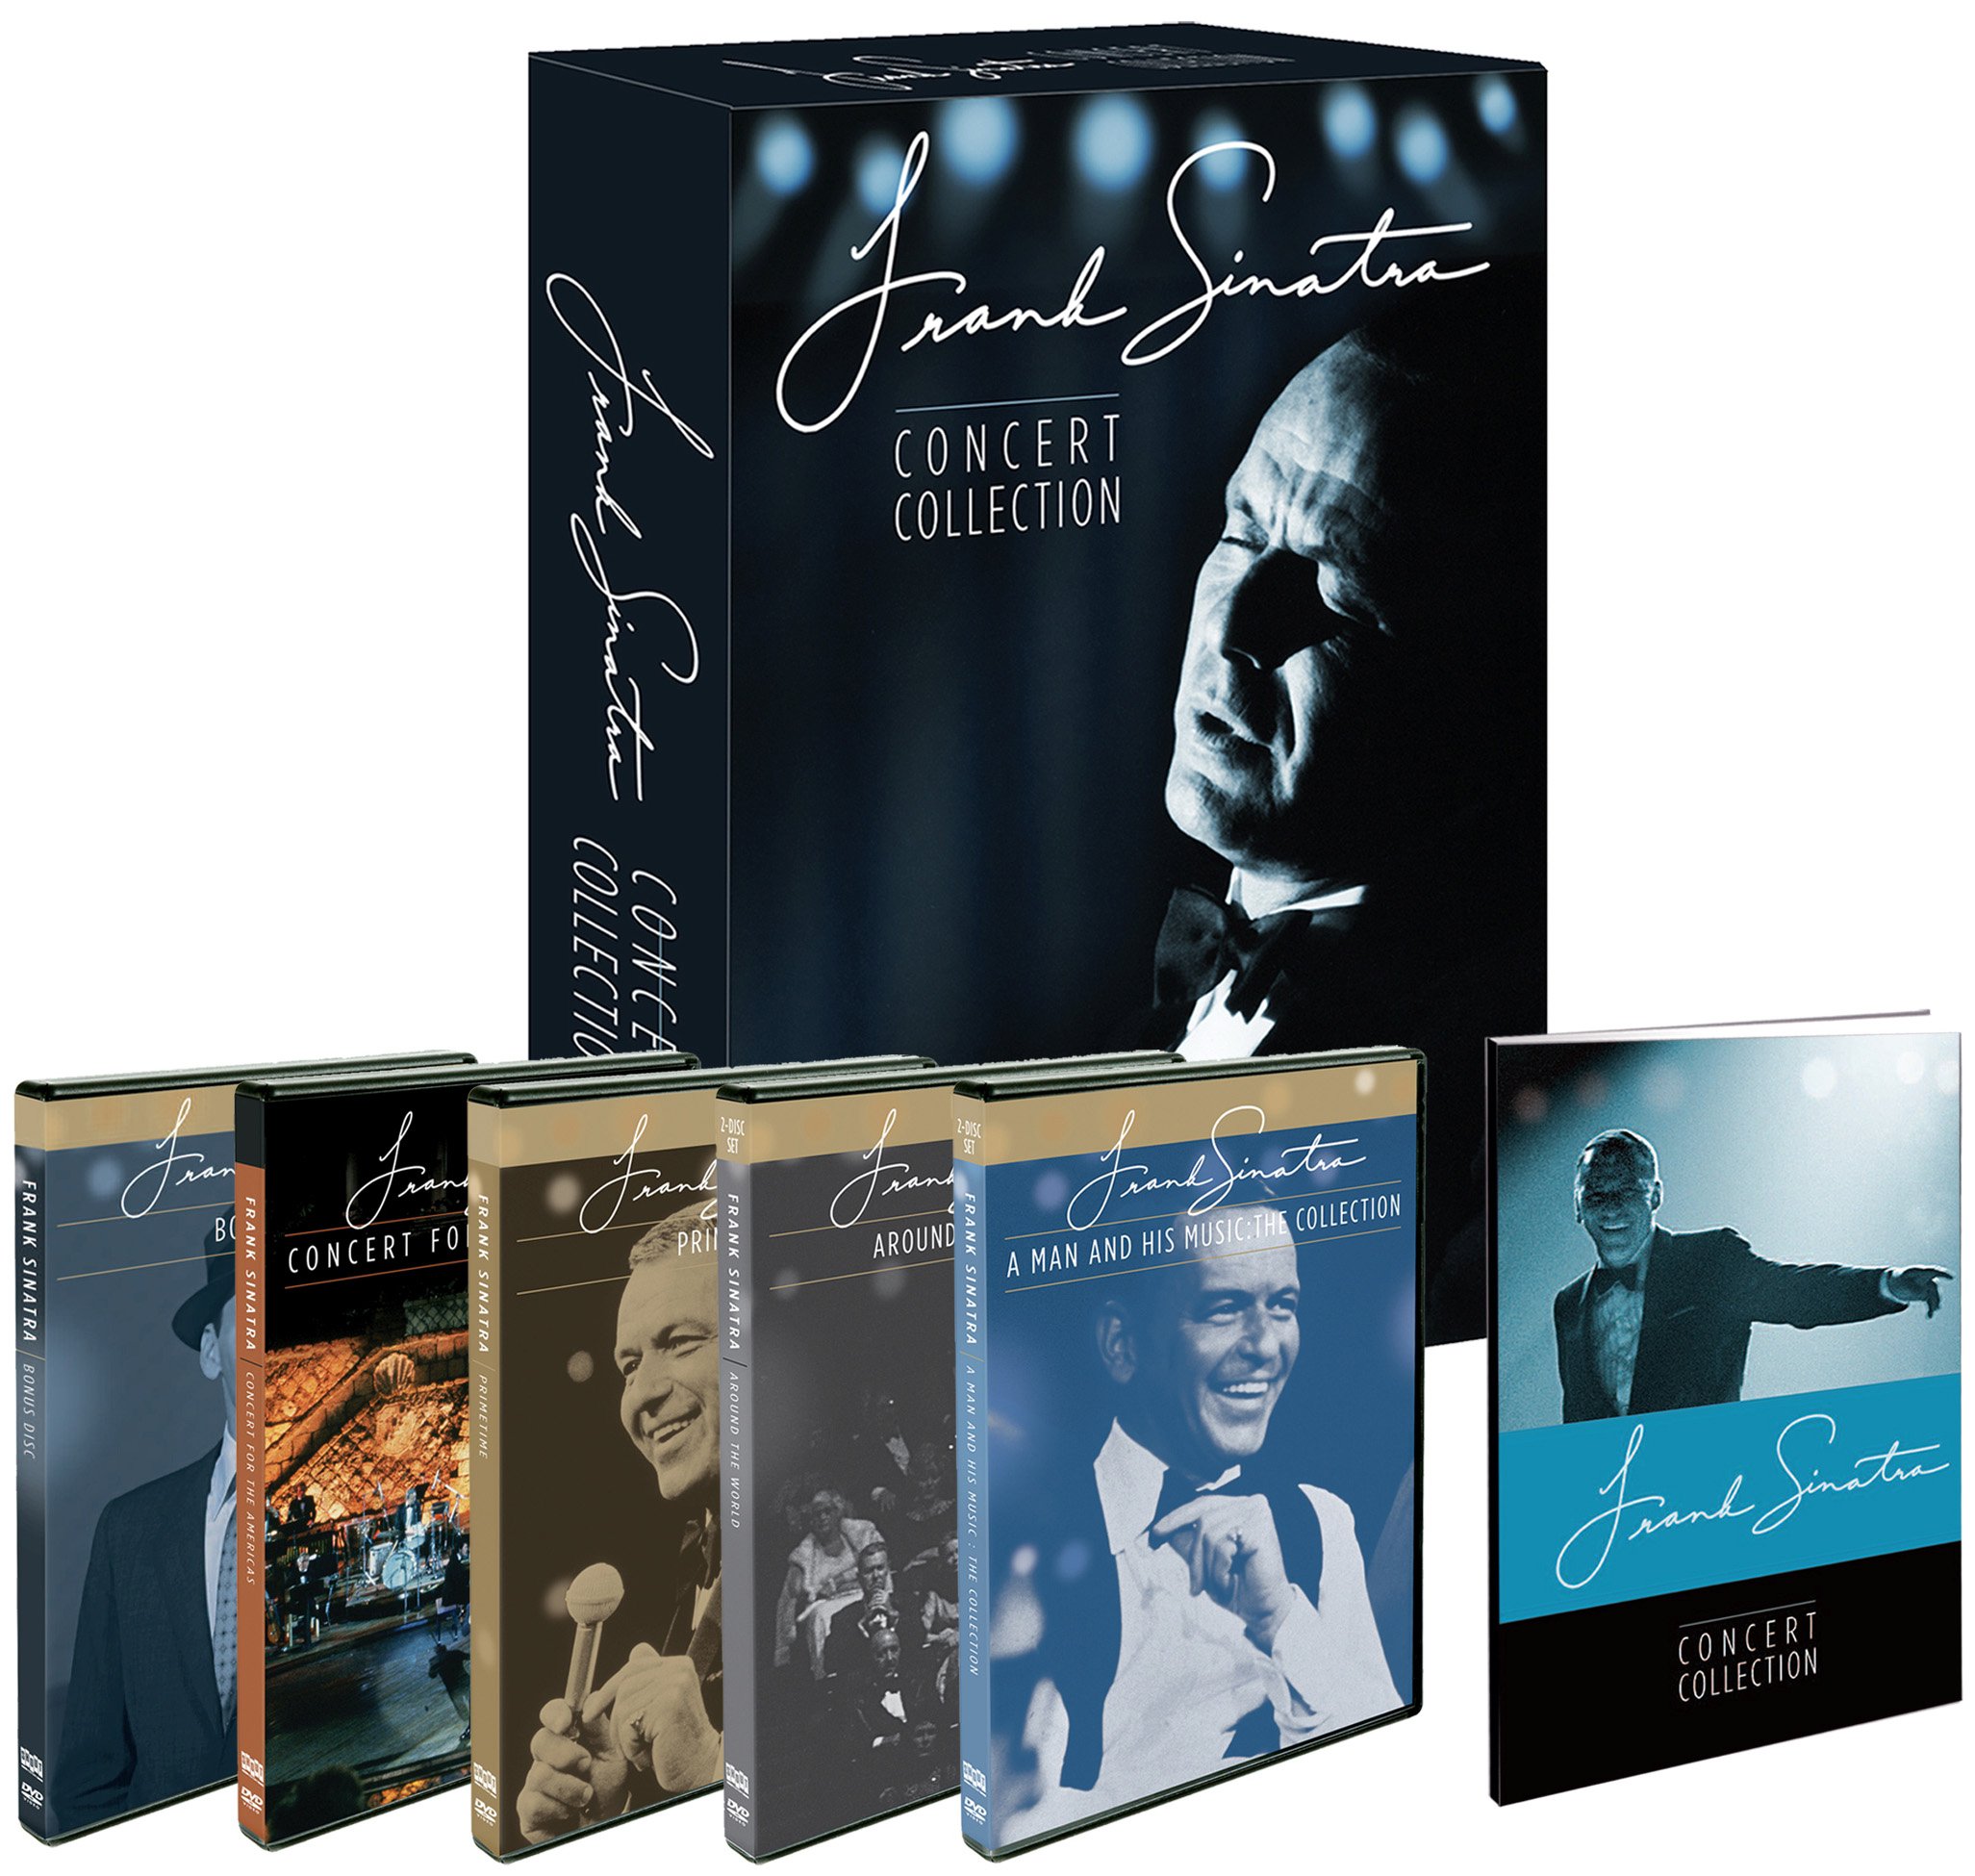 Frank Sinatra – Concert Collection on MovieShack